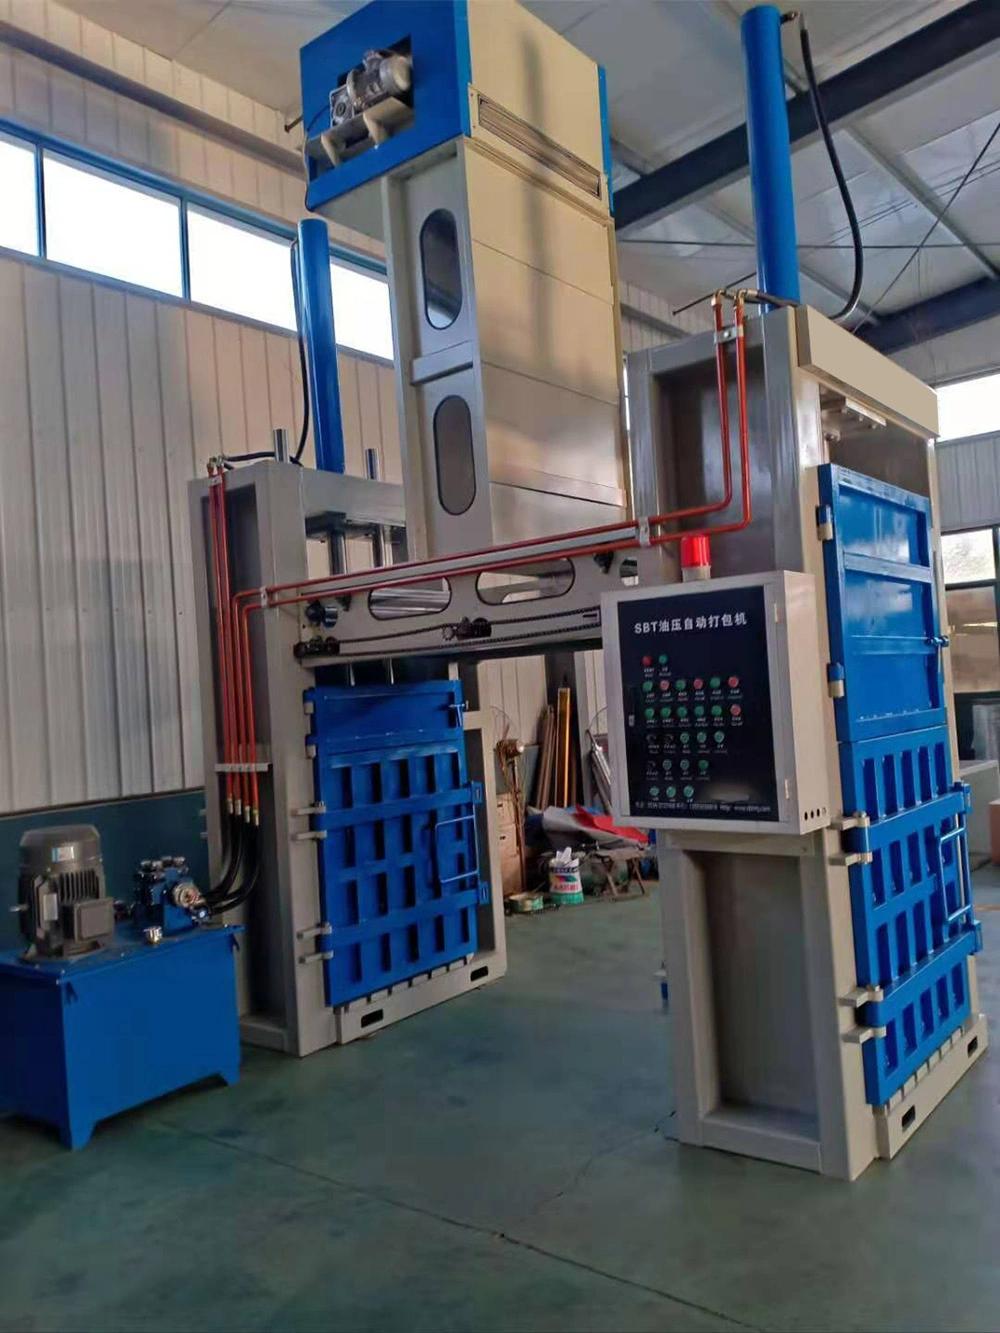 Automatic Packaging Machine for Waste Paper, Automatic Packaging Machine for Waste Paper Boxes, Corrugated Boxes, Plastic Films, etc.